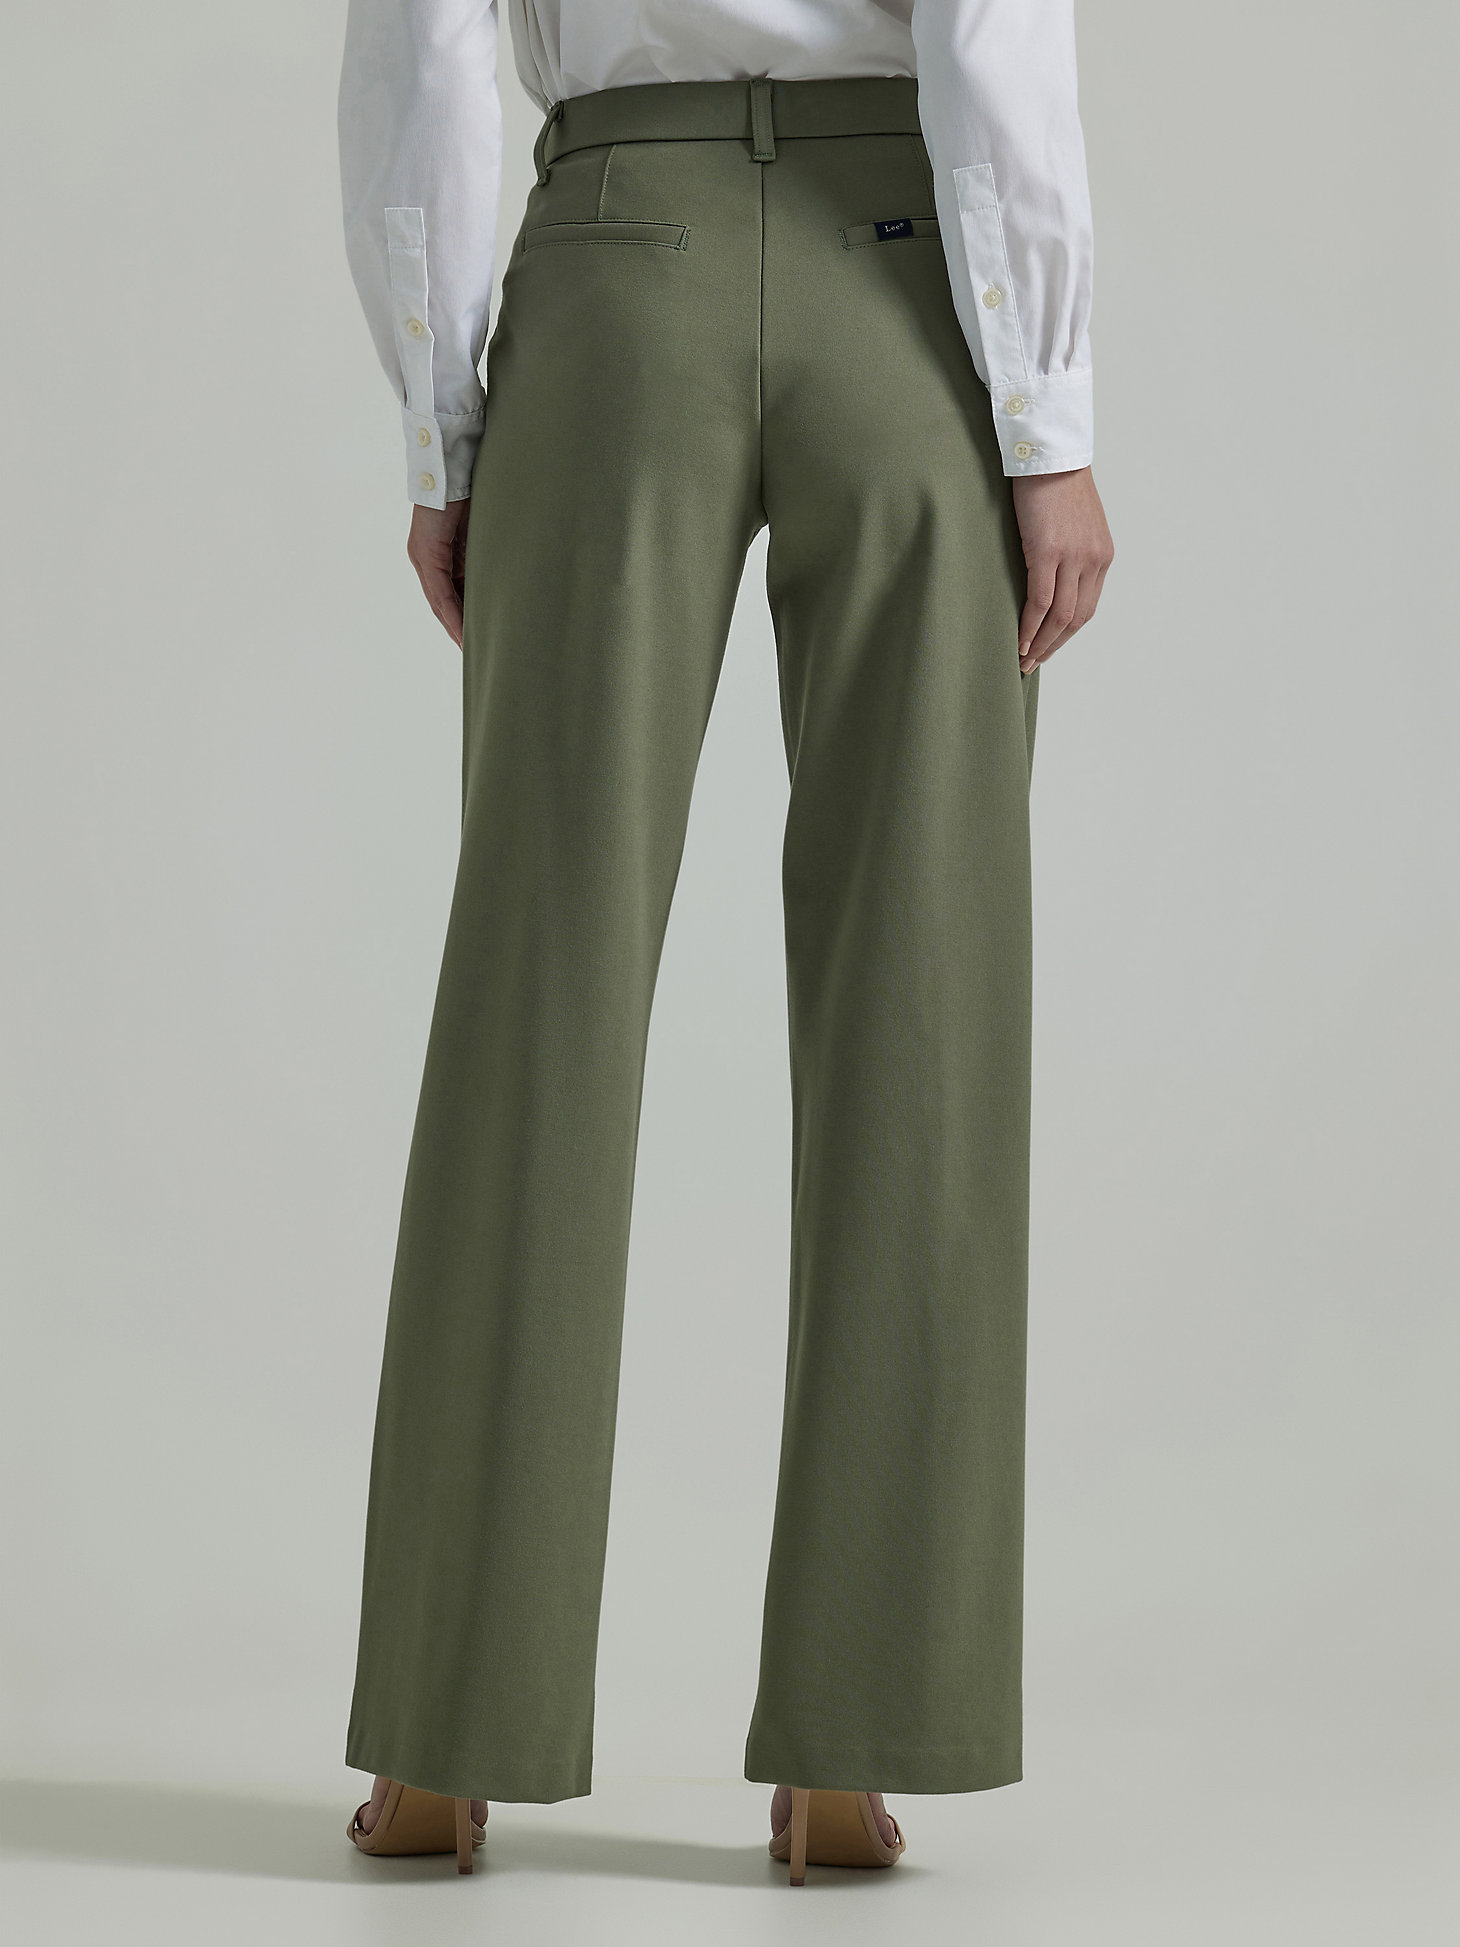 Women's Ultra Lux Comfort Any Wear Wide Leg Pant in Olive Grove alternative view 2